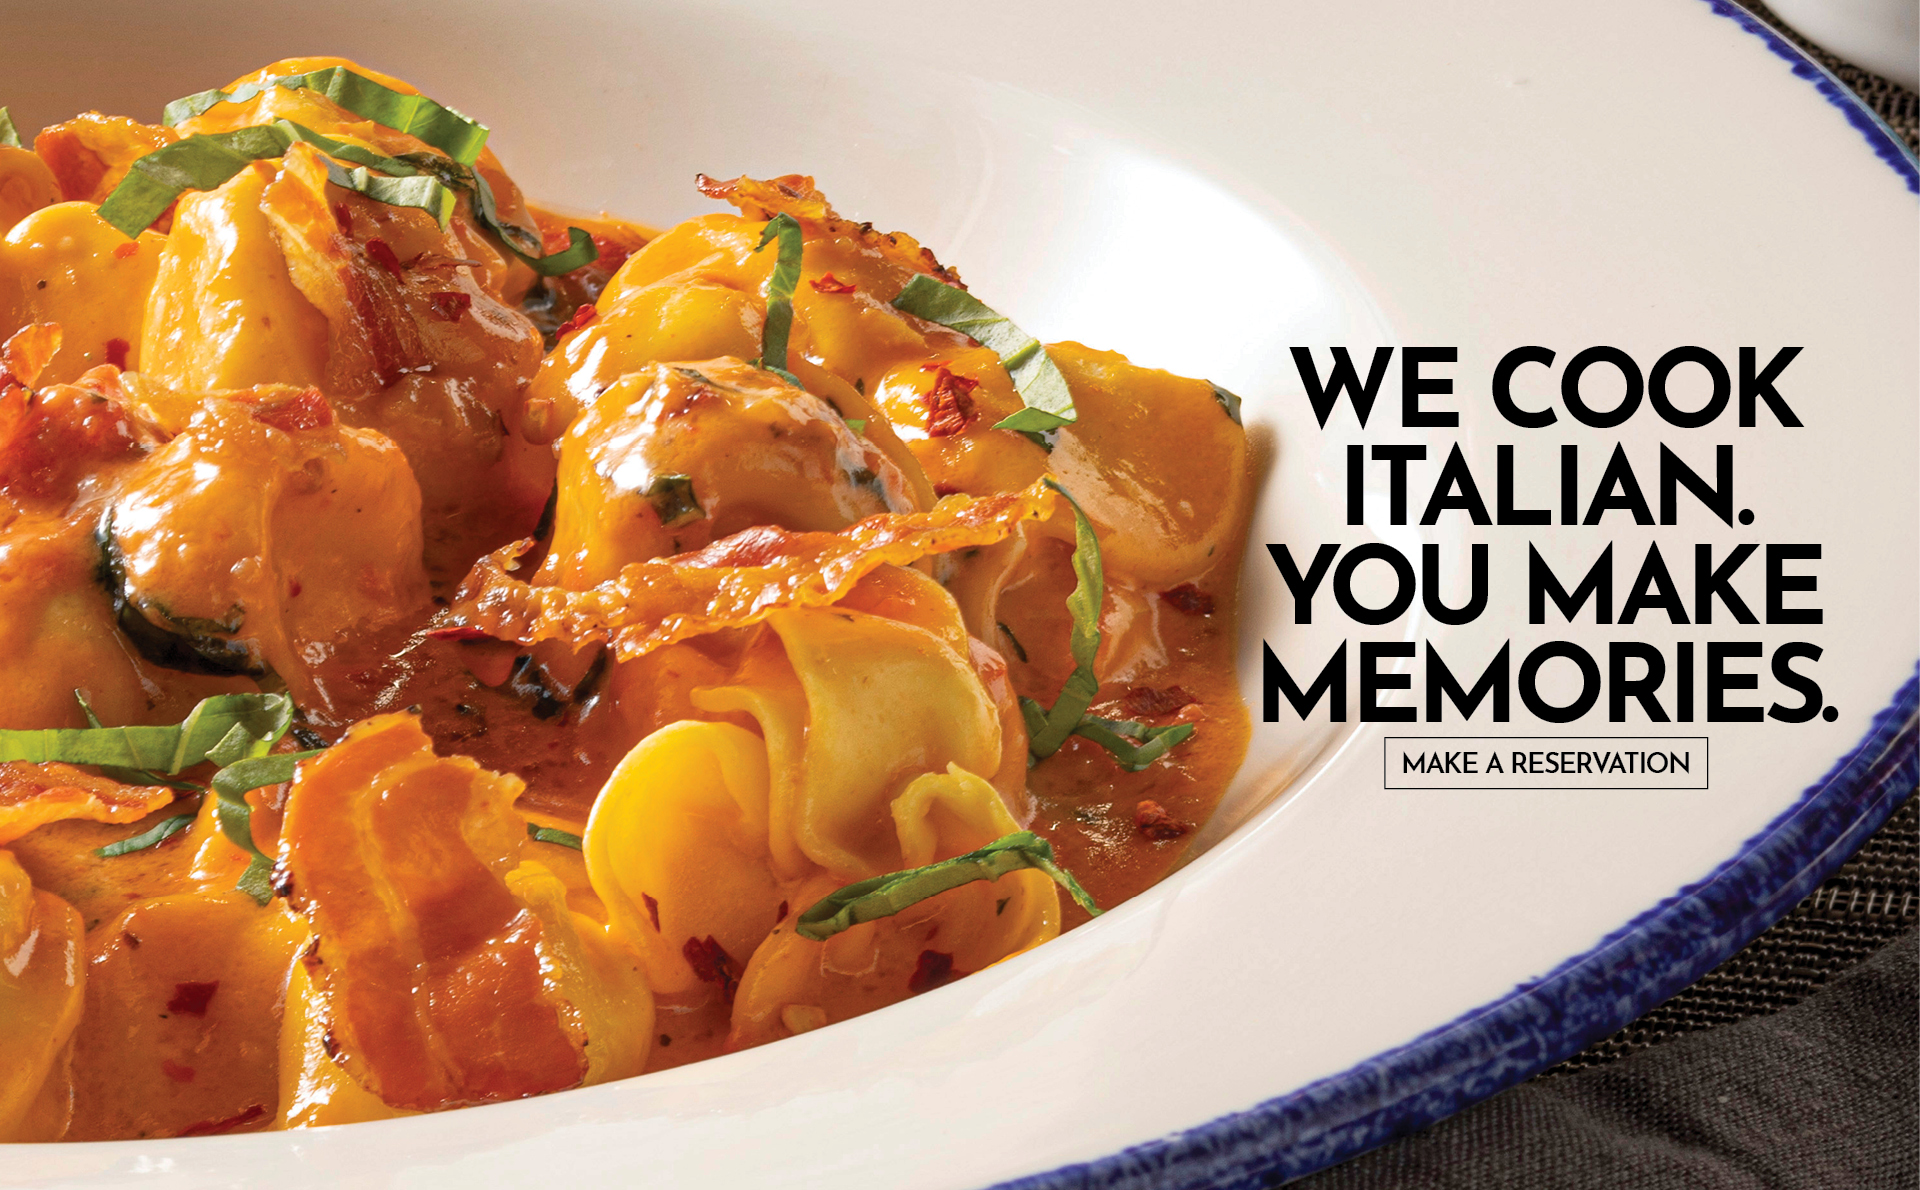 We cook Italian. You make memories. Click to make a reservation.